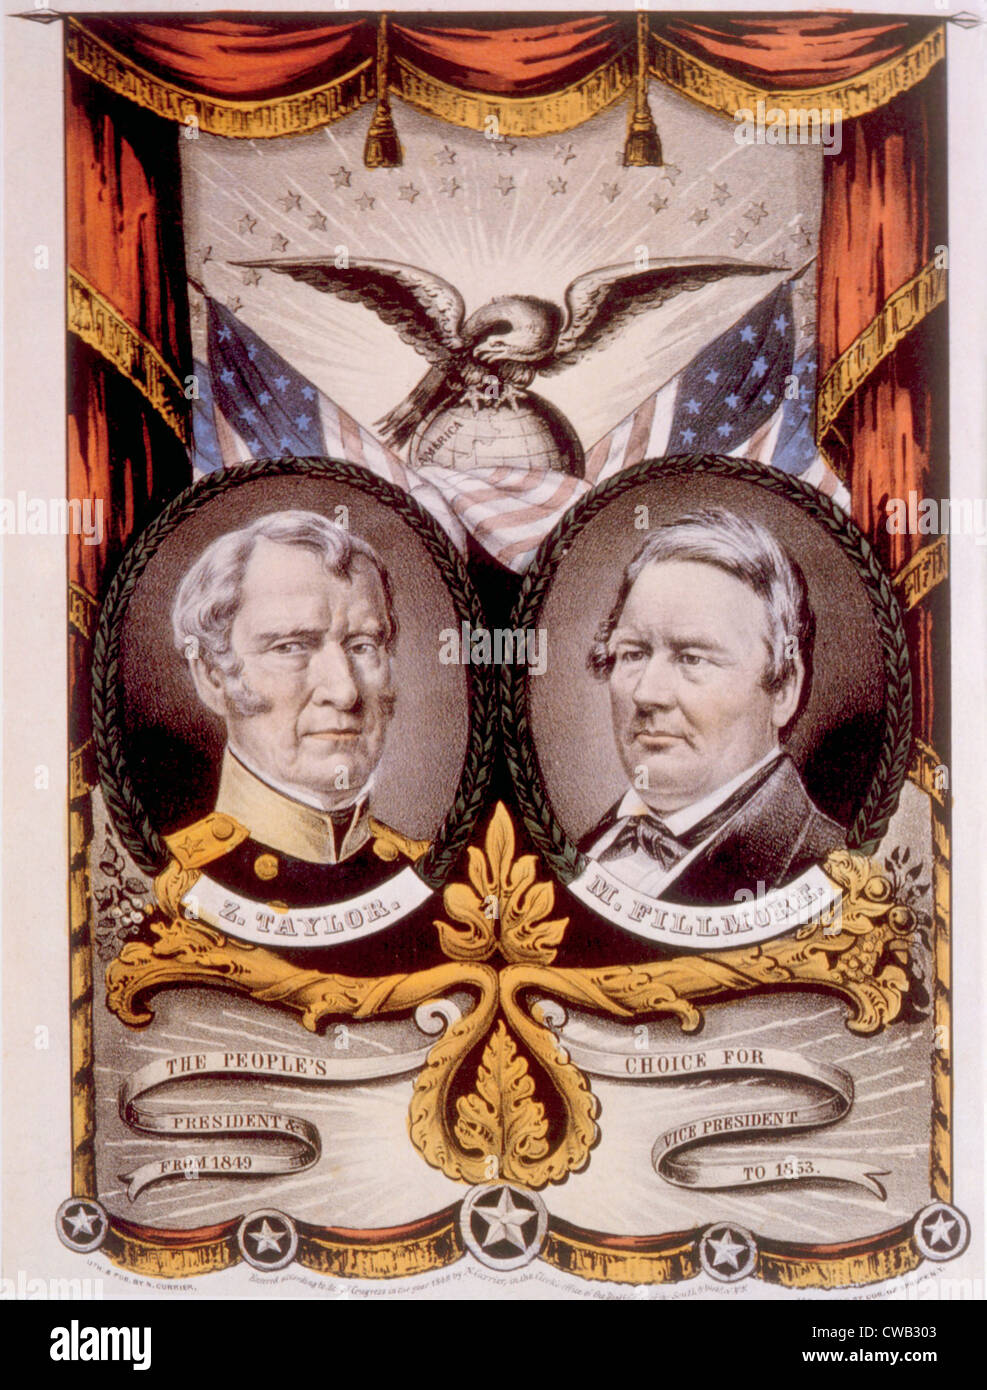 Campaign poster for the Whig Party candidates Zachary Taylor for President, Millard Fillmore for Vice President, 1848, Currier Stock Photo